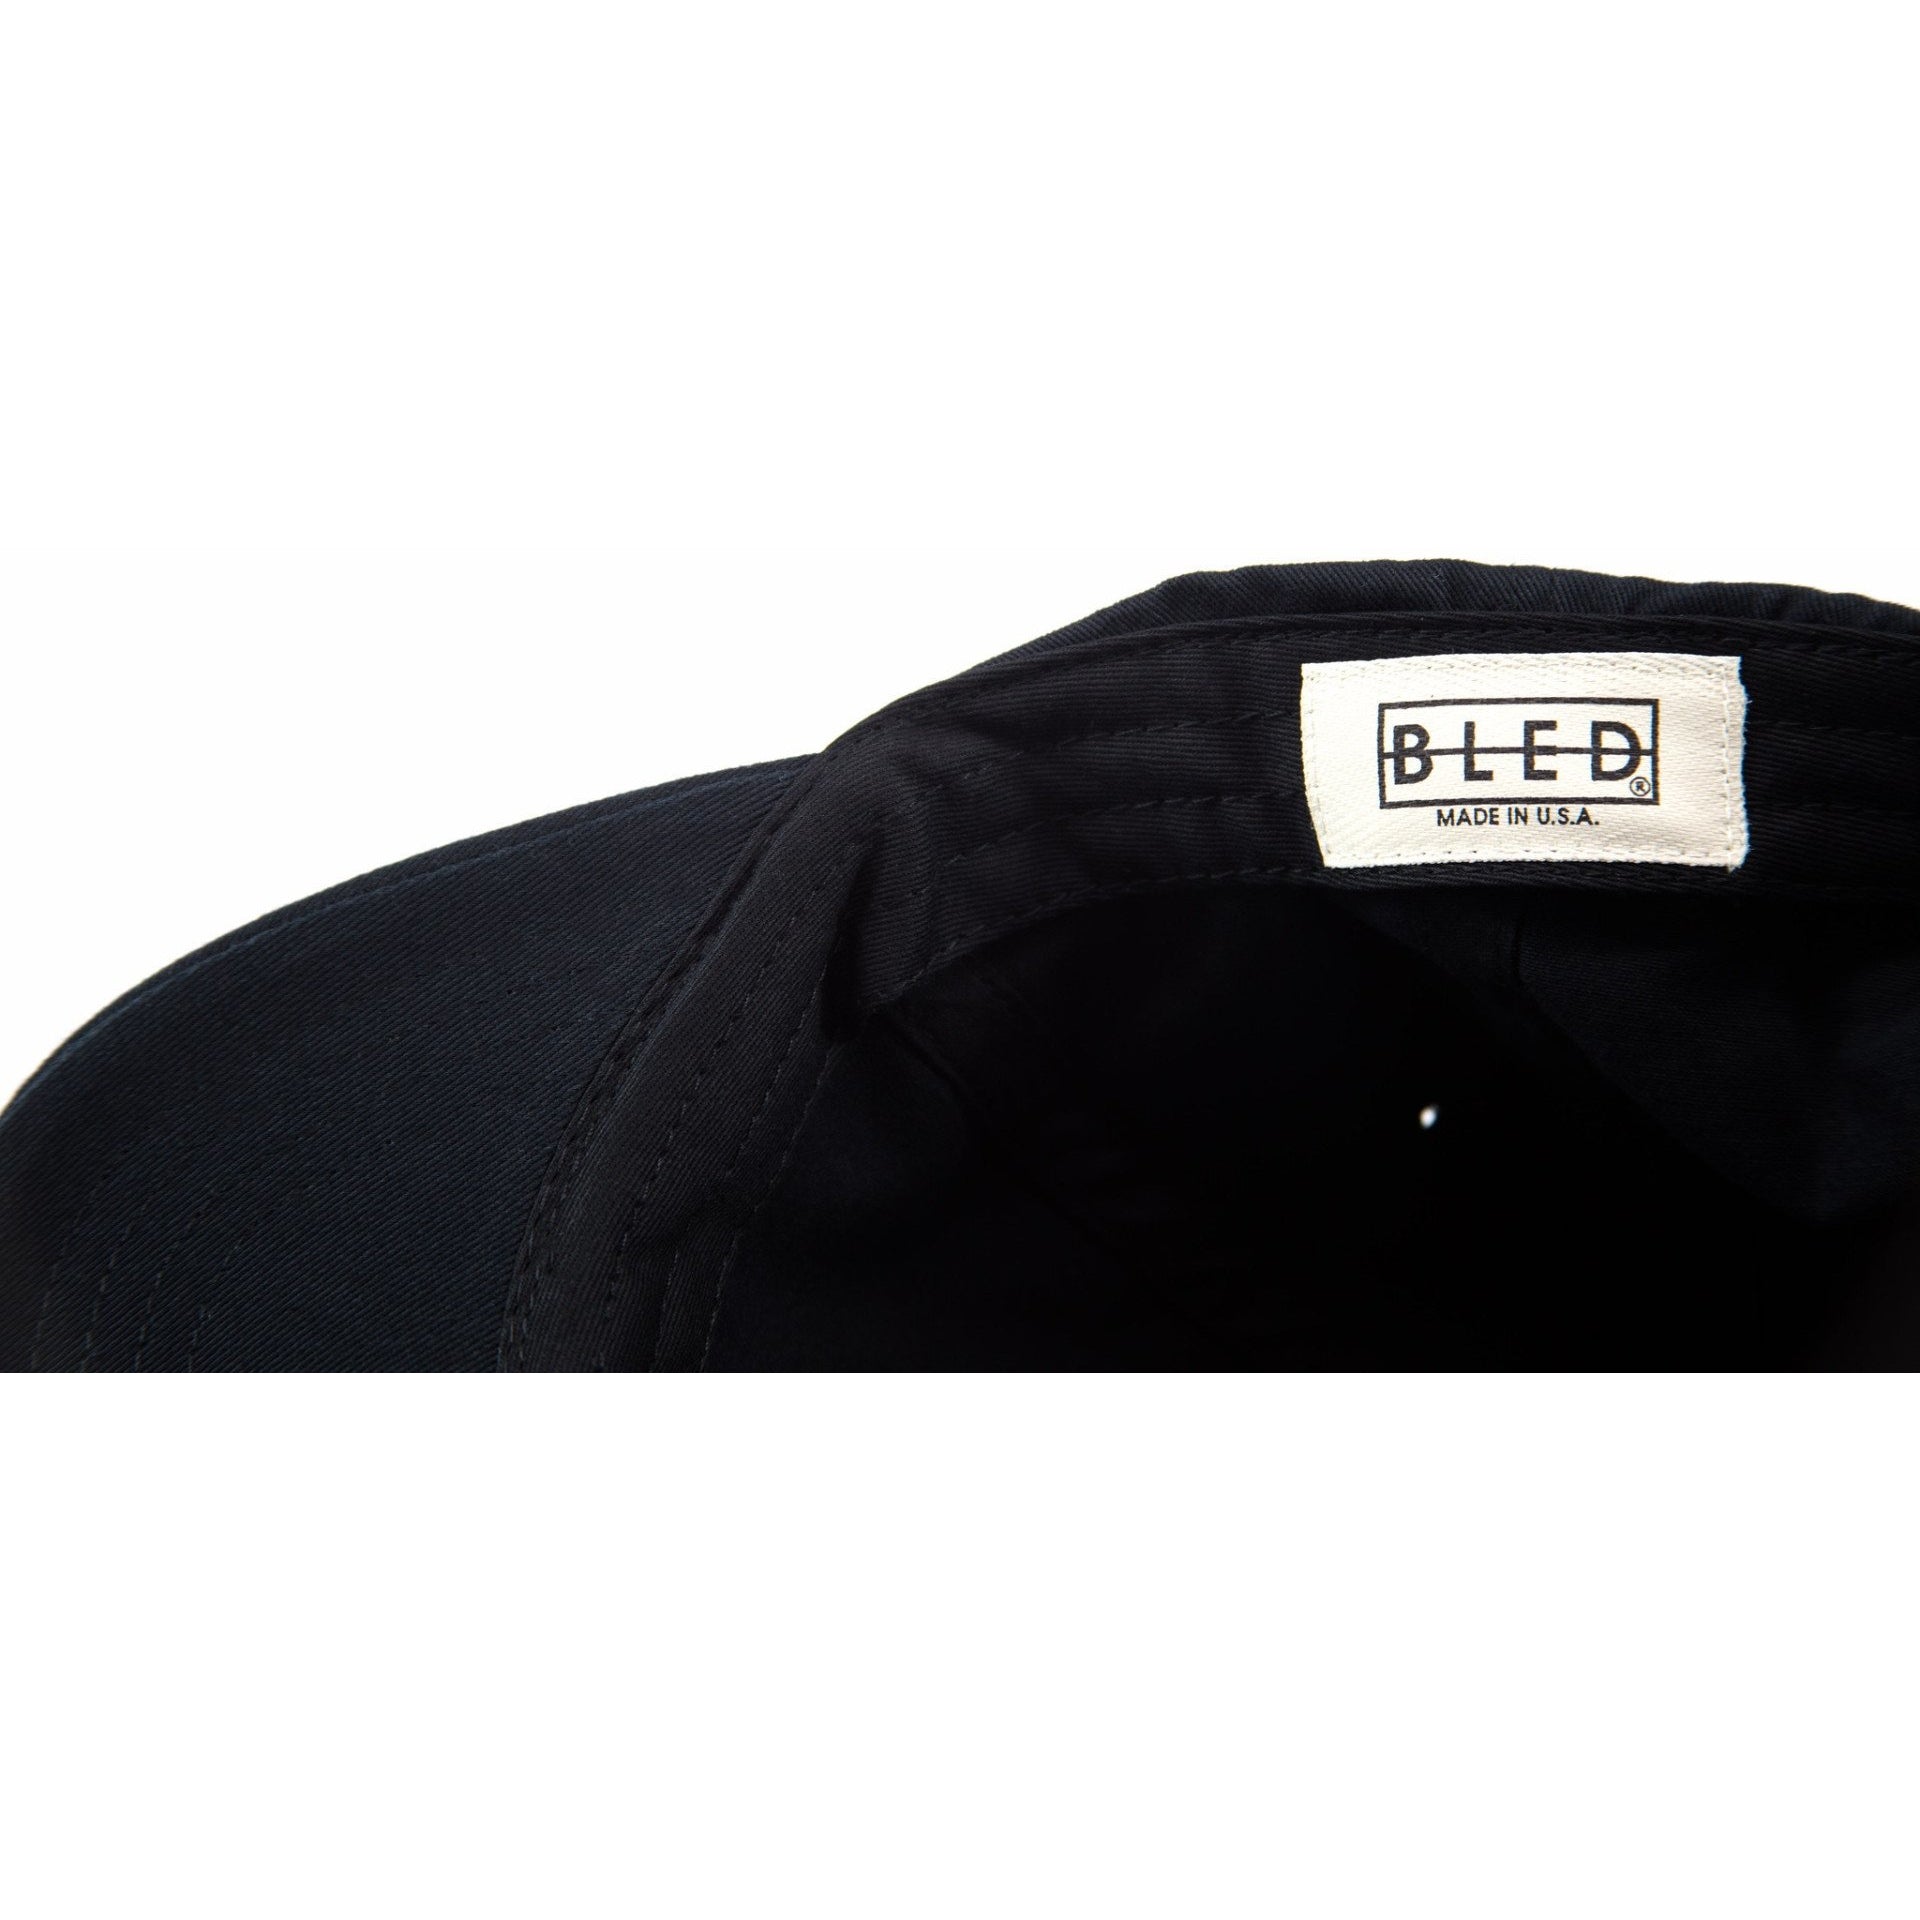 6-panel unconstructed 100% Cotton black dad hat featuring Levels design embroidery on the front and Bled logo embroidered on the back with adjustable strap closure.